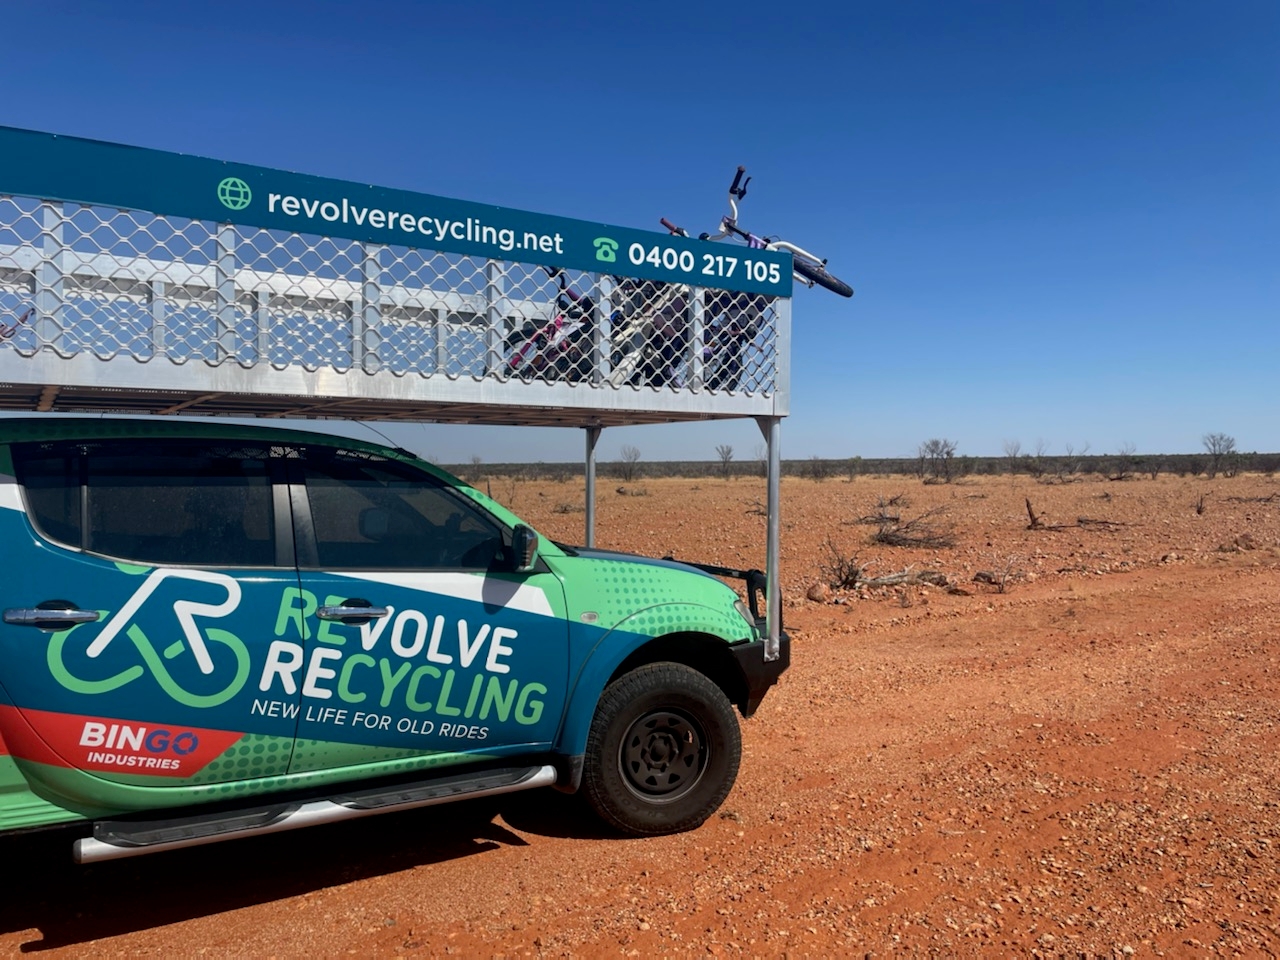 A blue and green truck with 'Revolve Recycling' written on the side parked in the Australian desert. The truck is carrying an overhead tray with bicycles in it, for communities to use.  